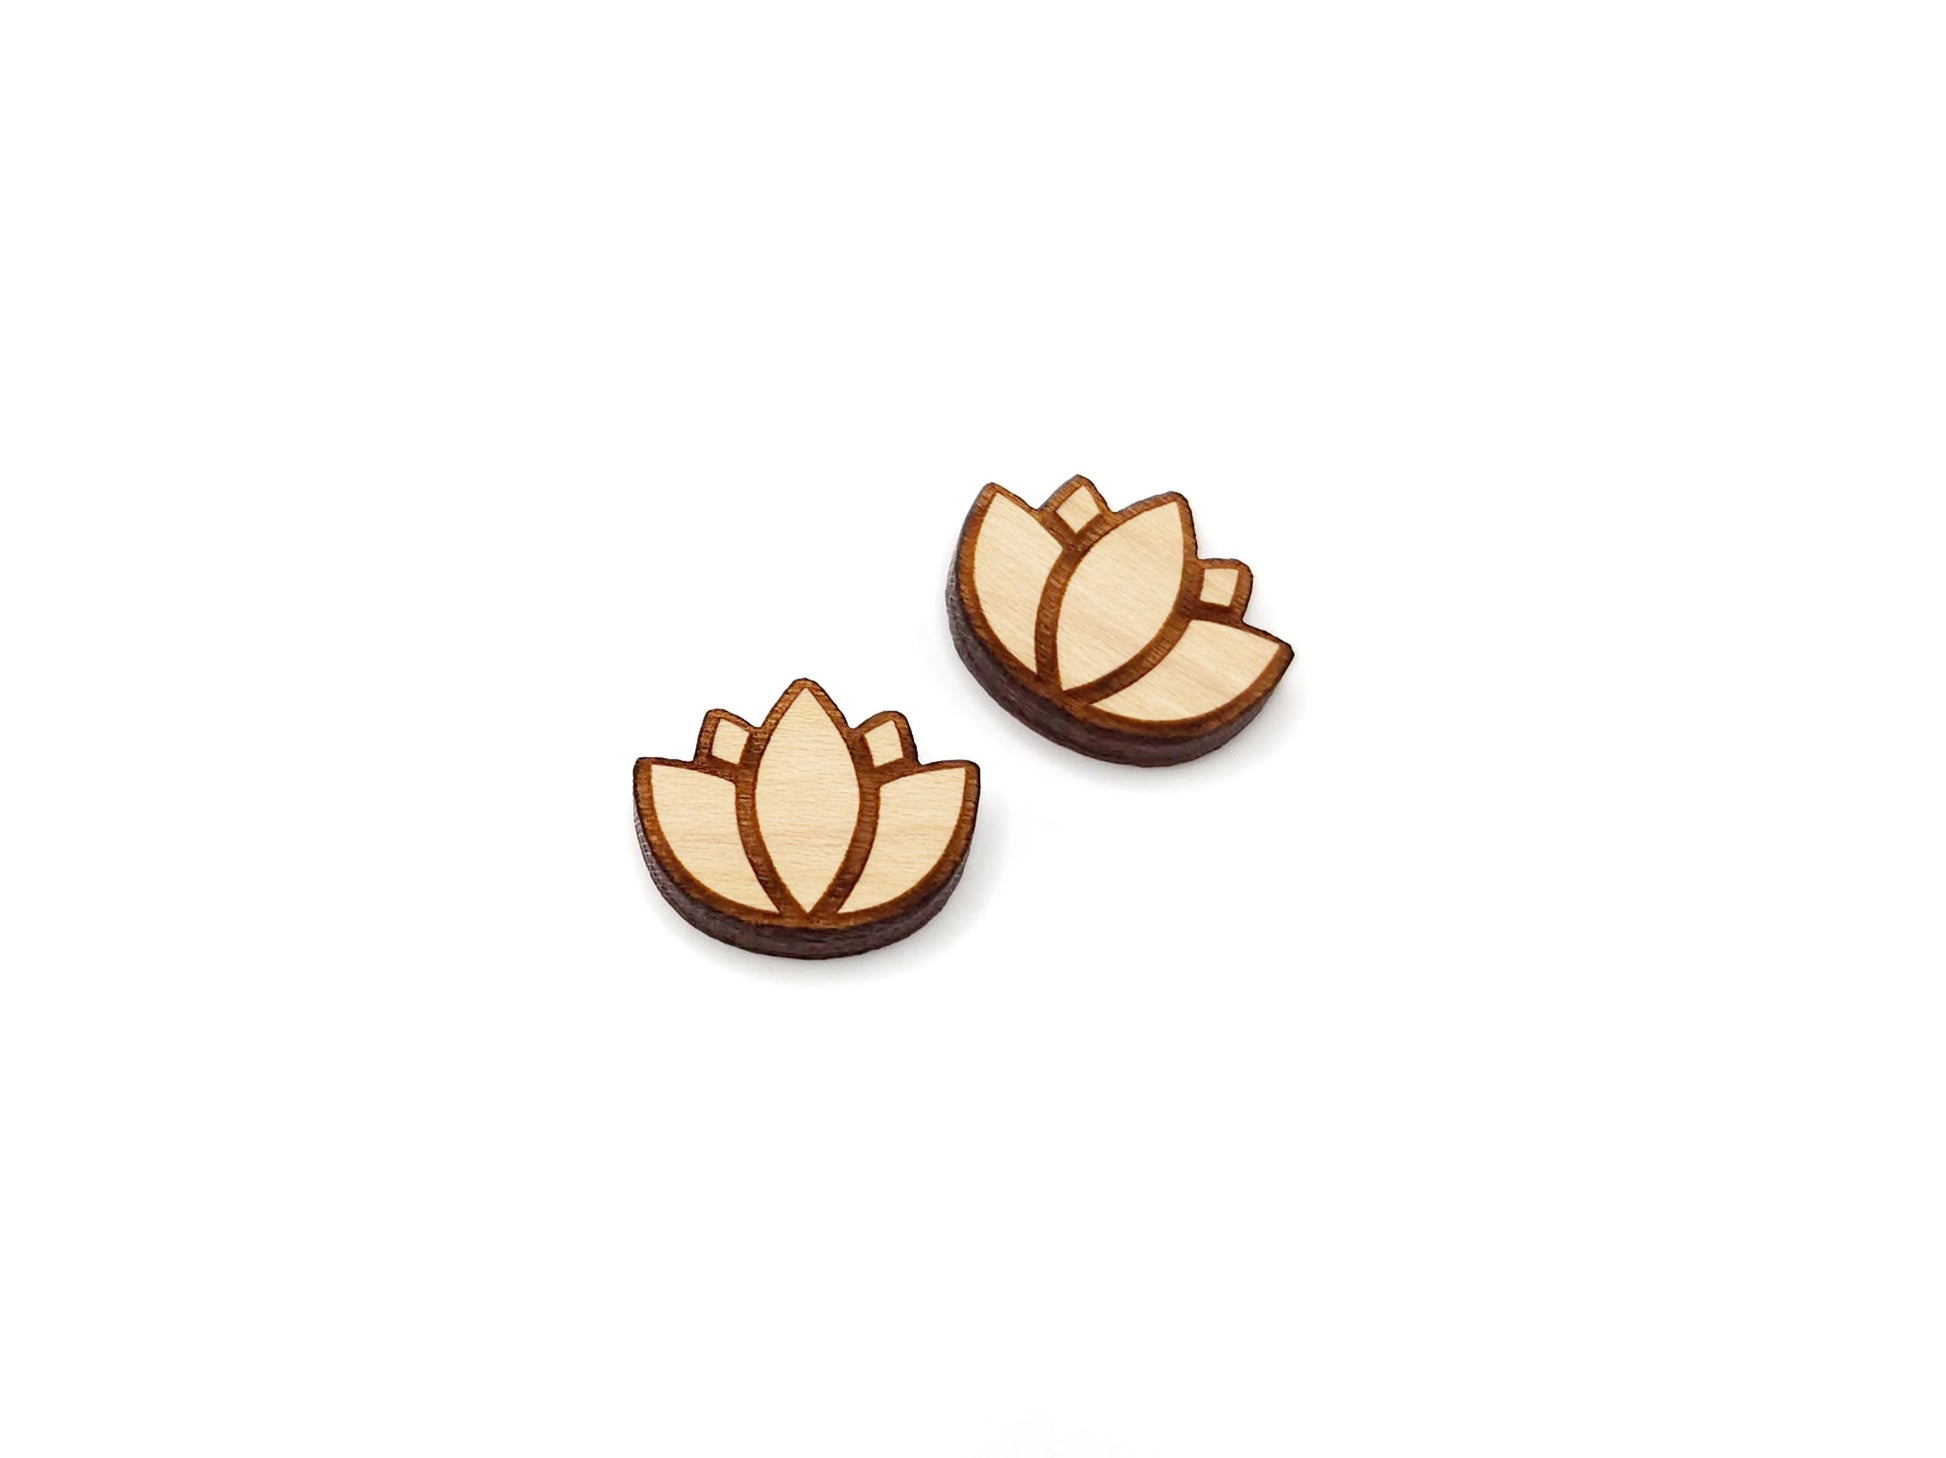 a pair of wooden cabochon earring blanks cut and engraved to look like a lotus flower